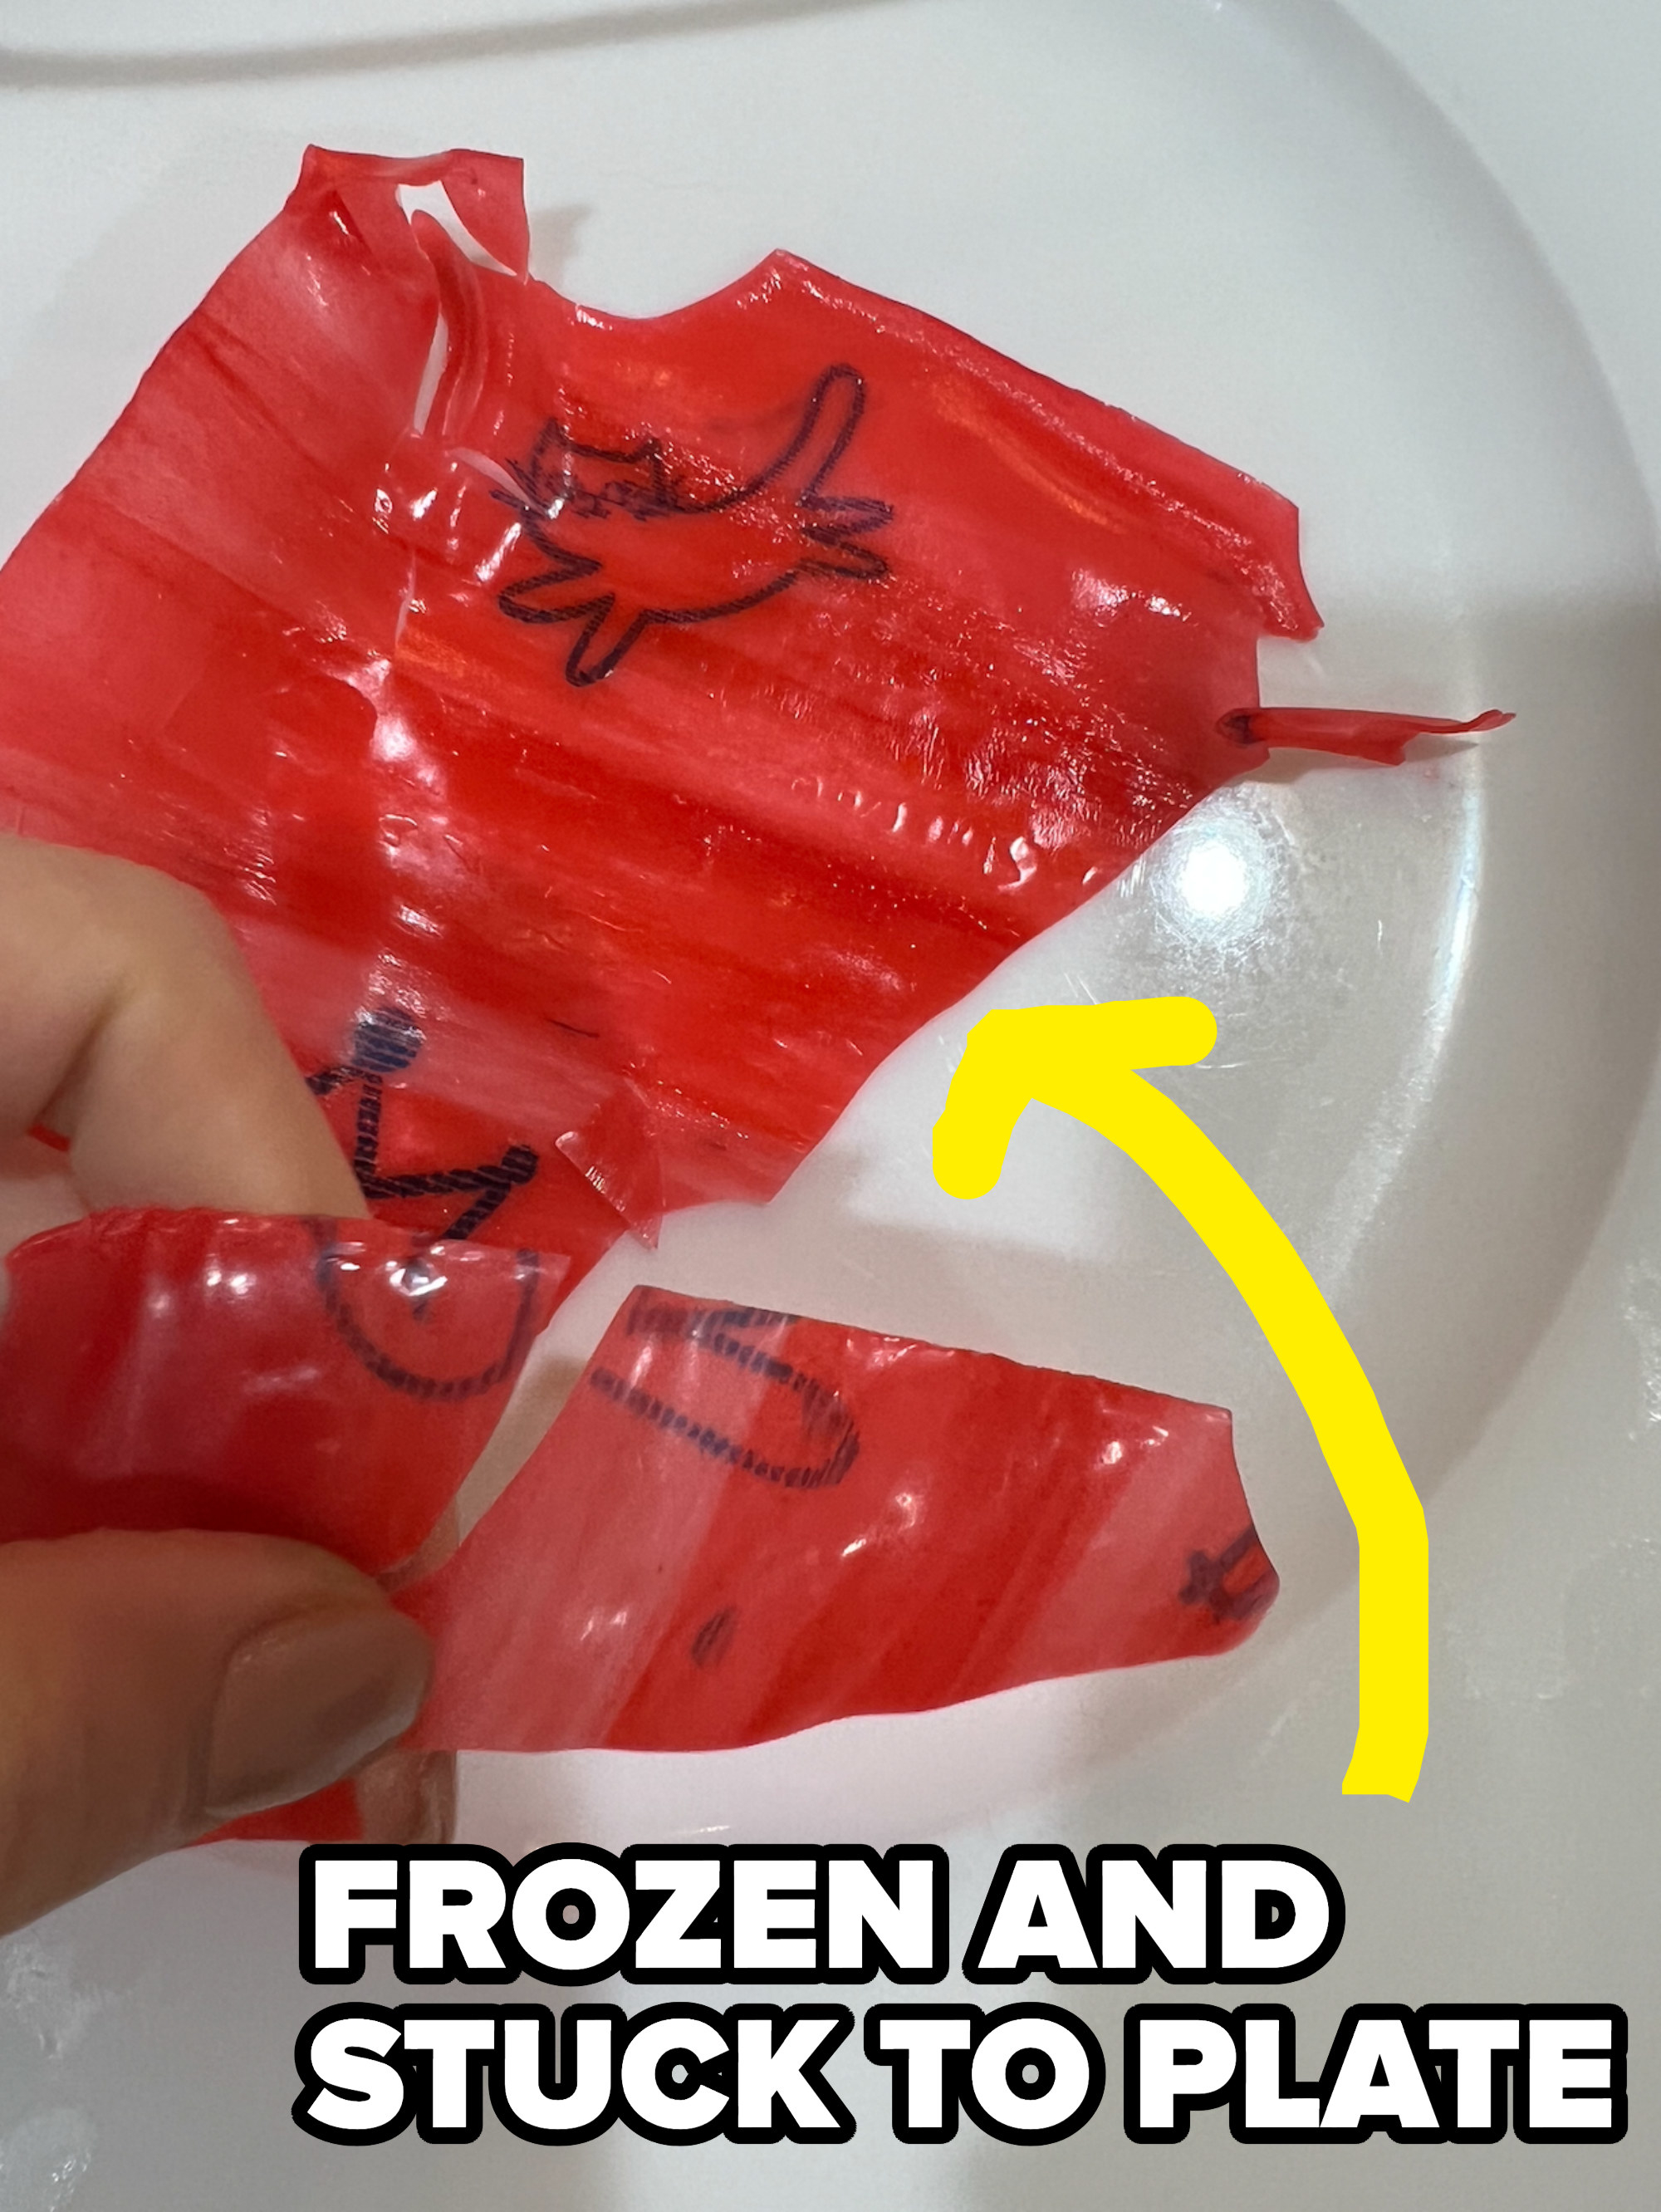 The roll-up frozen and stuck to the plate